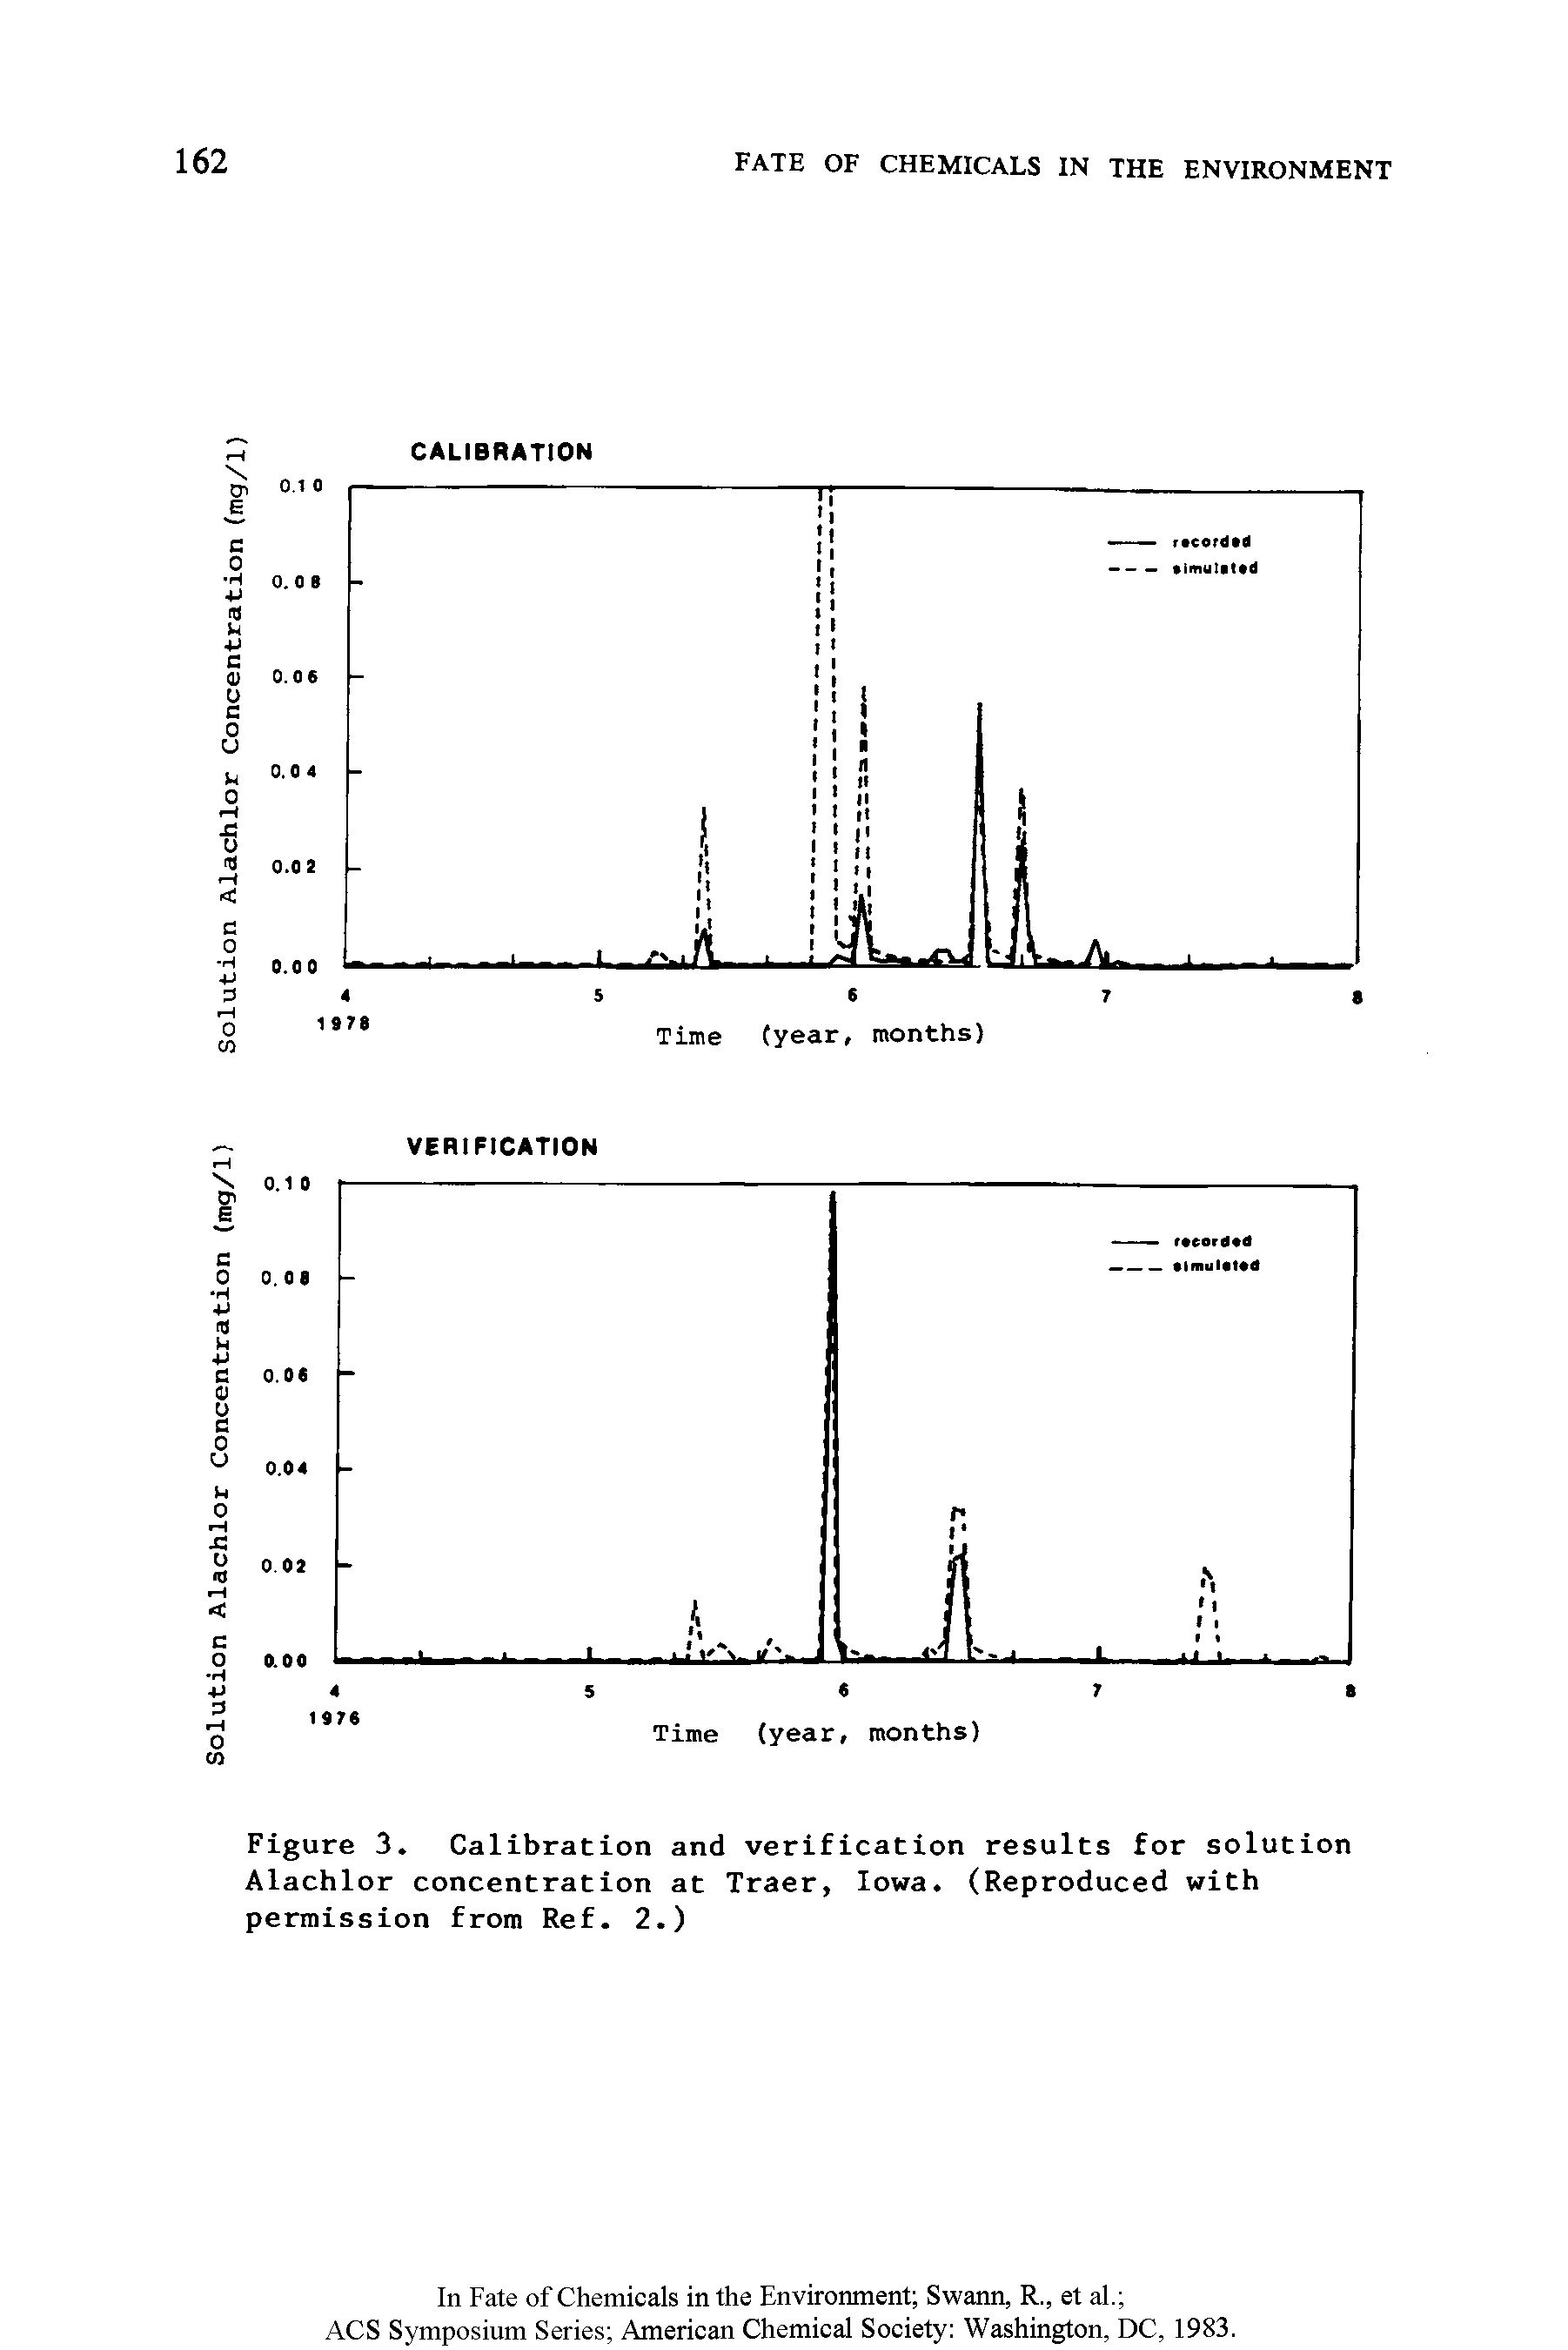 Figure 3. Calibration and verification results for solution Alachlor concentration at Traer, Iowa. (Reproduced with permission from Ref. 2.)...